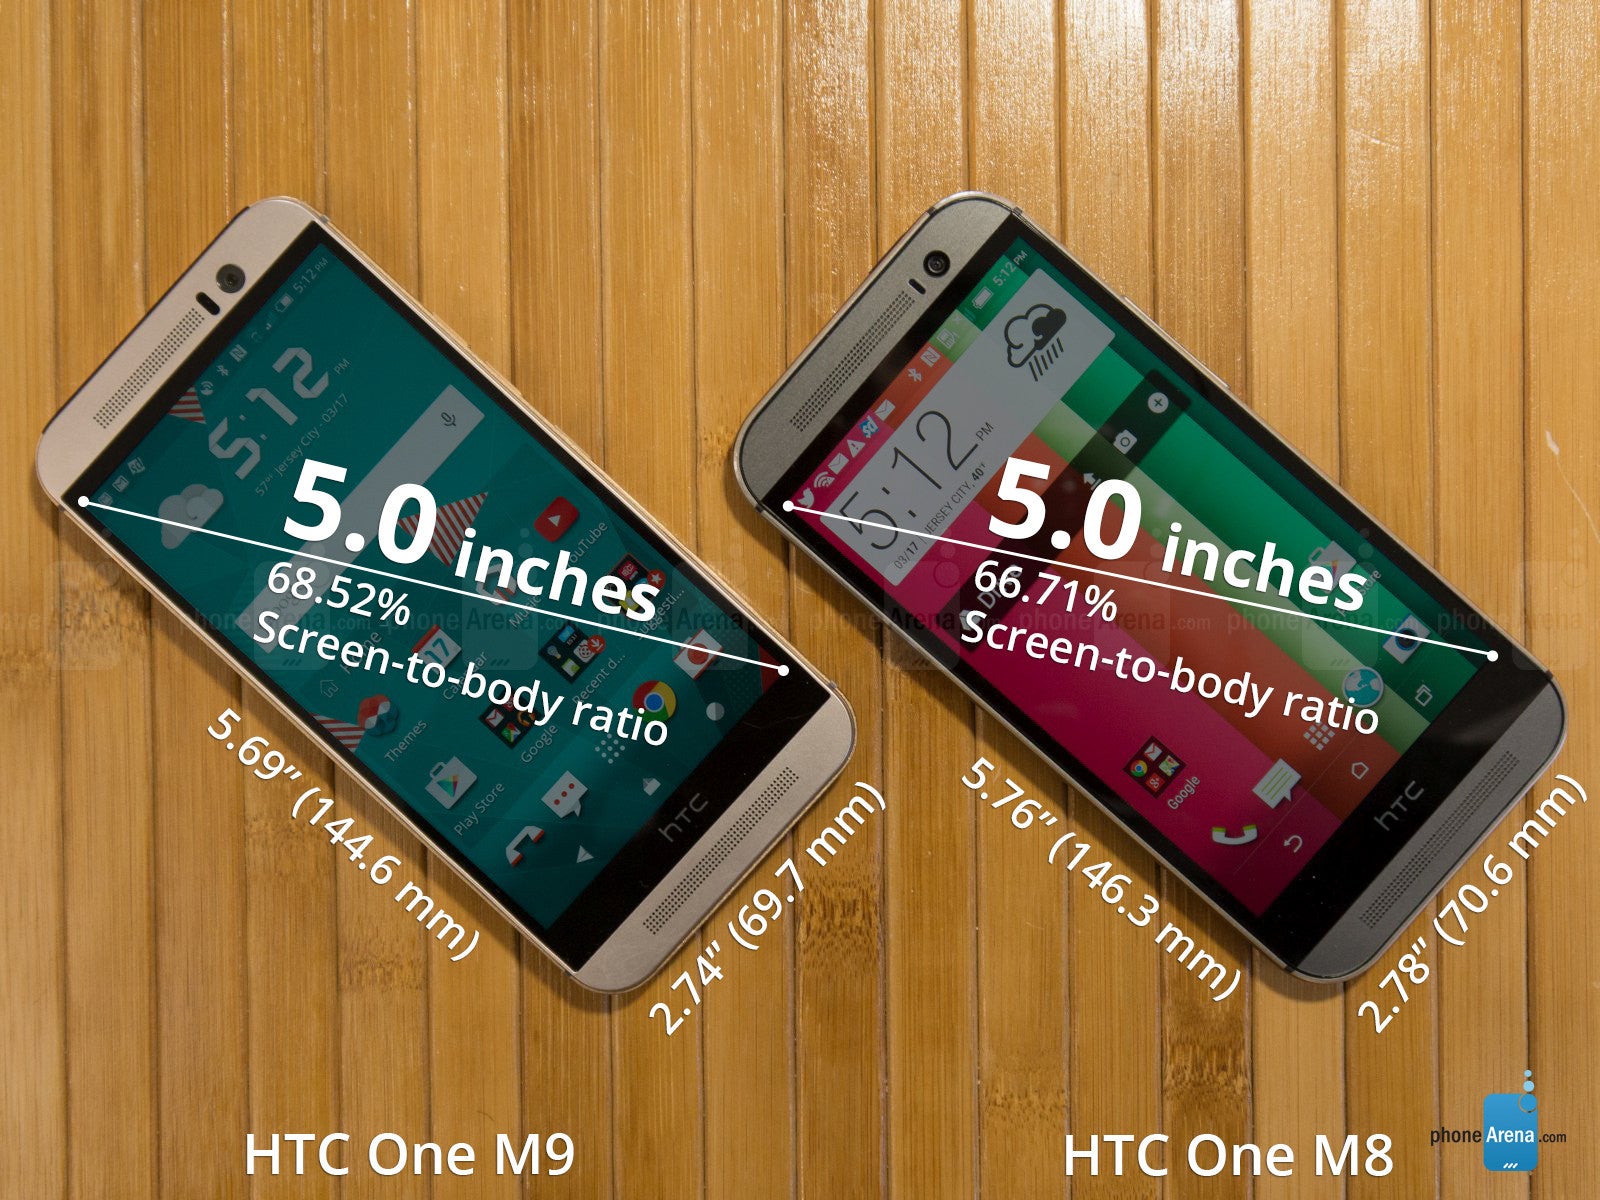 HTC One M9 vs HTC One M8 screen-to-body ratio comparison: which one's more efficient?